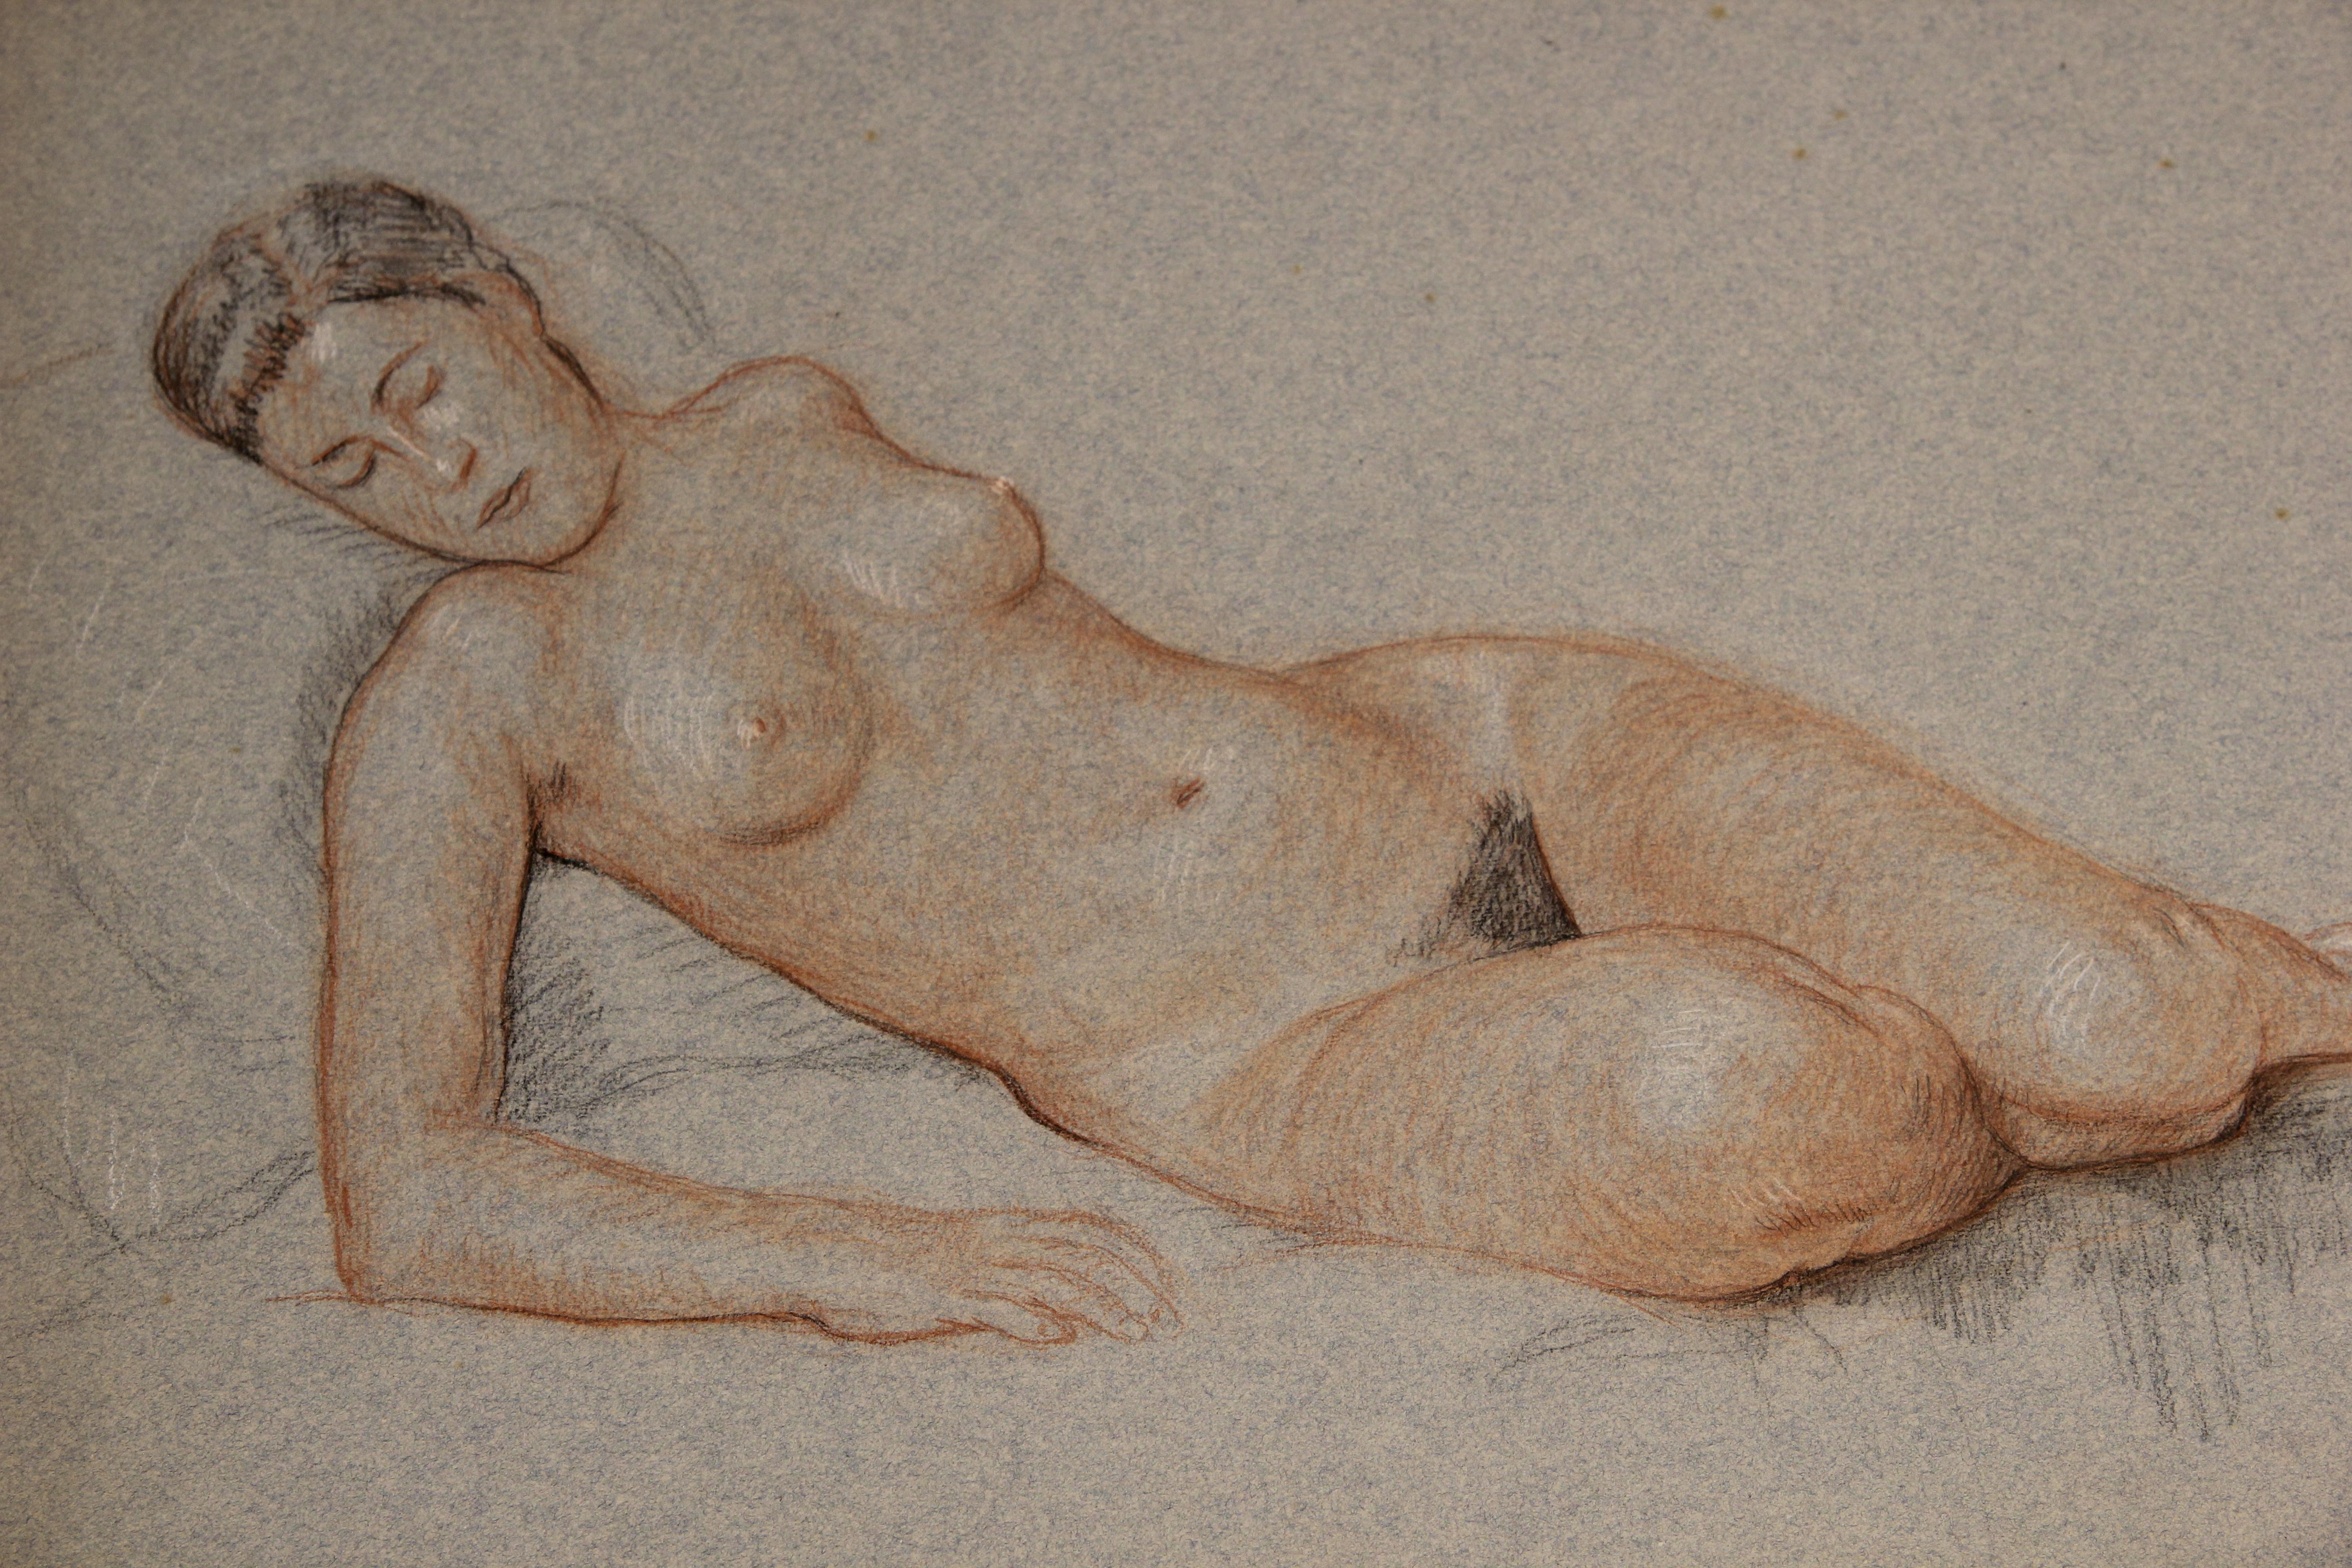 Naturalistic Study of a Reclining Nude Woman - Art by Emile Lejeune